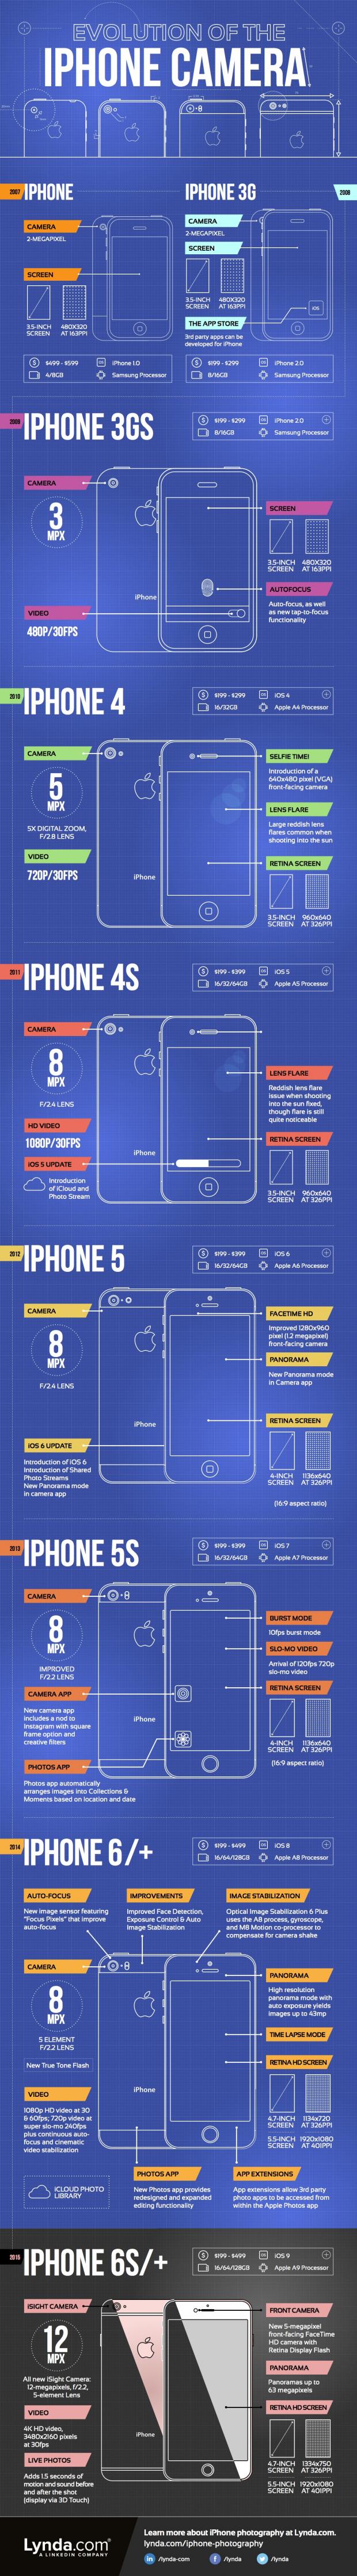 The evolution of the iPhone camera